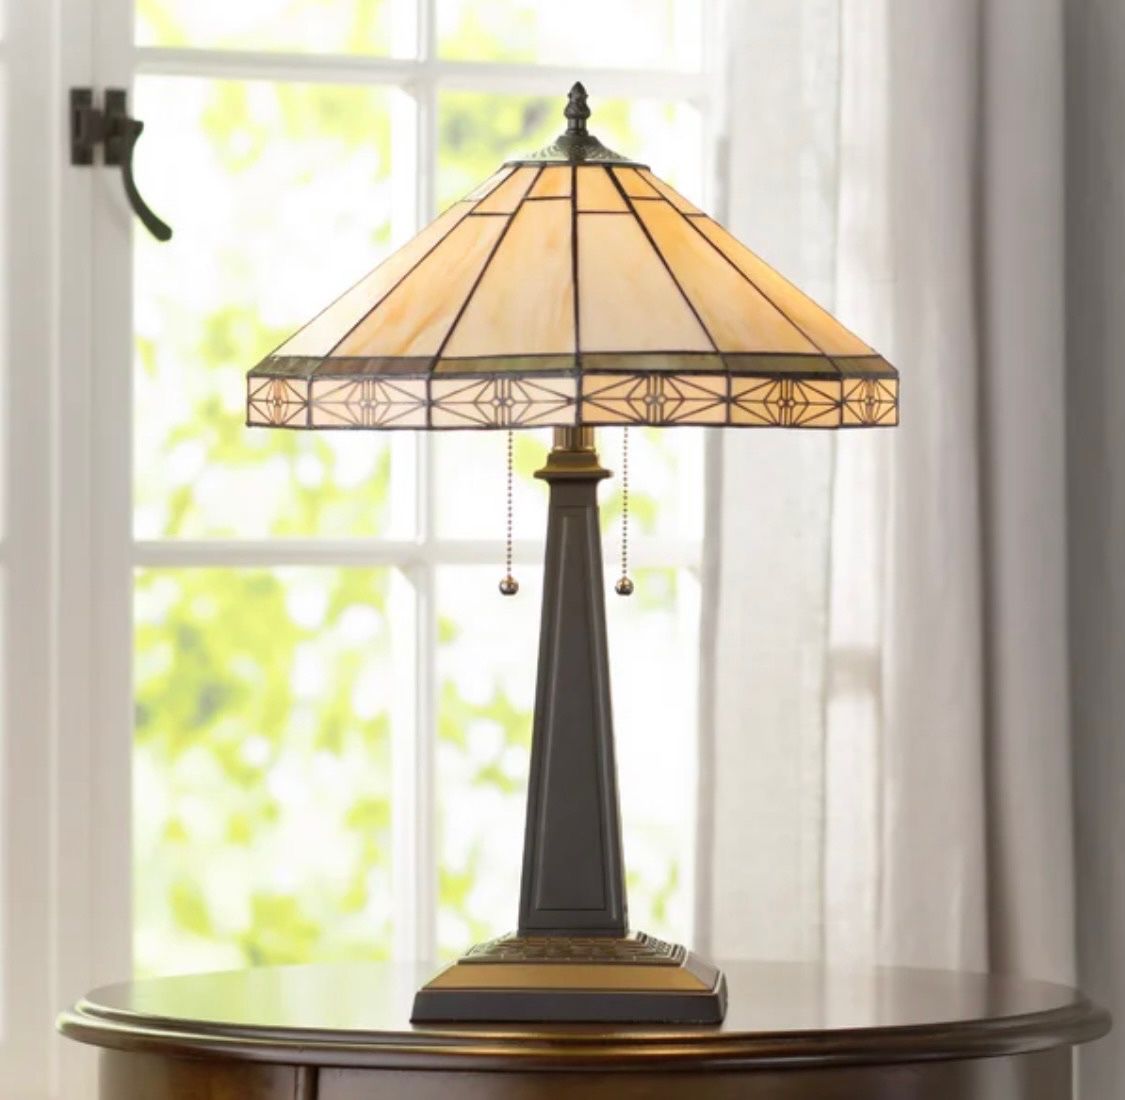 Charlotte 22.6” table lamp. 22.6 H x 15.9 W. Color base: gray. Shade: ivory, touches of tan, green. MSRP: $100. Our price: $100 + Sales tax